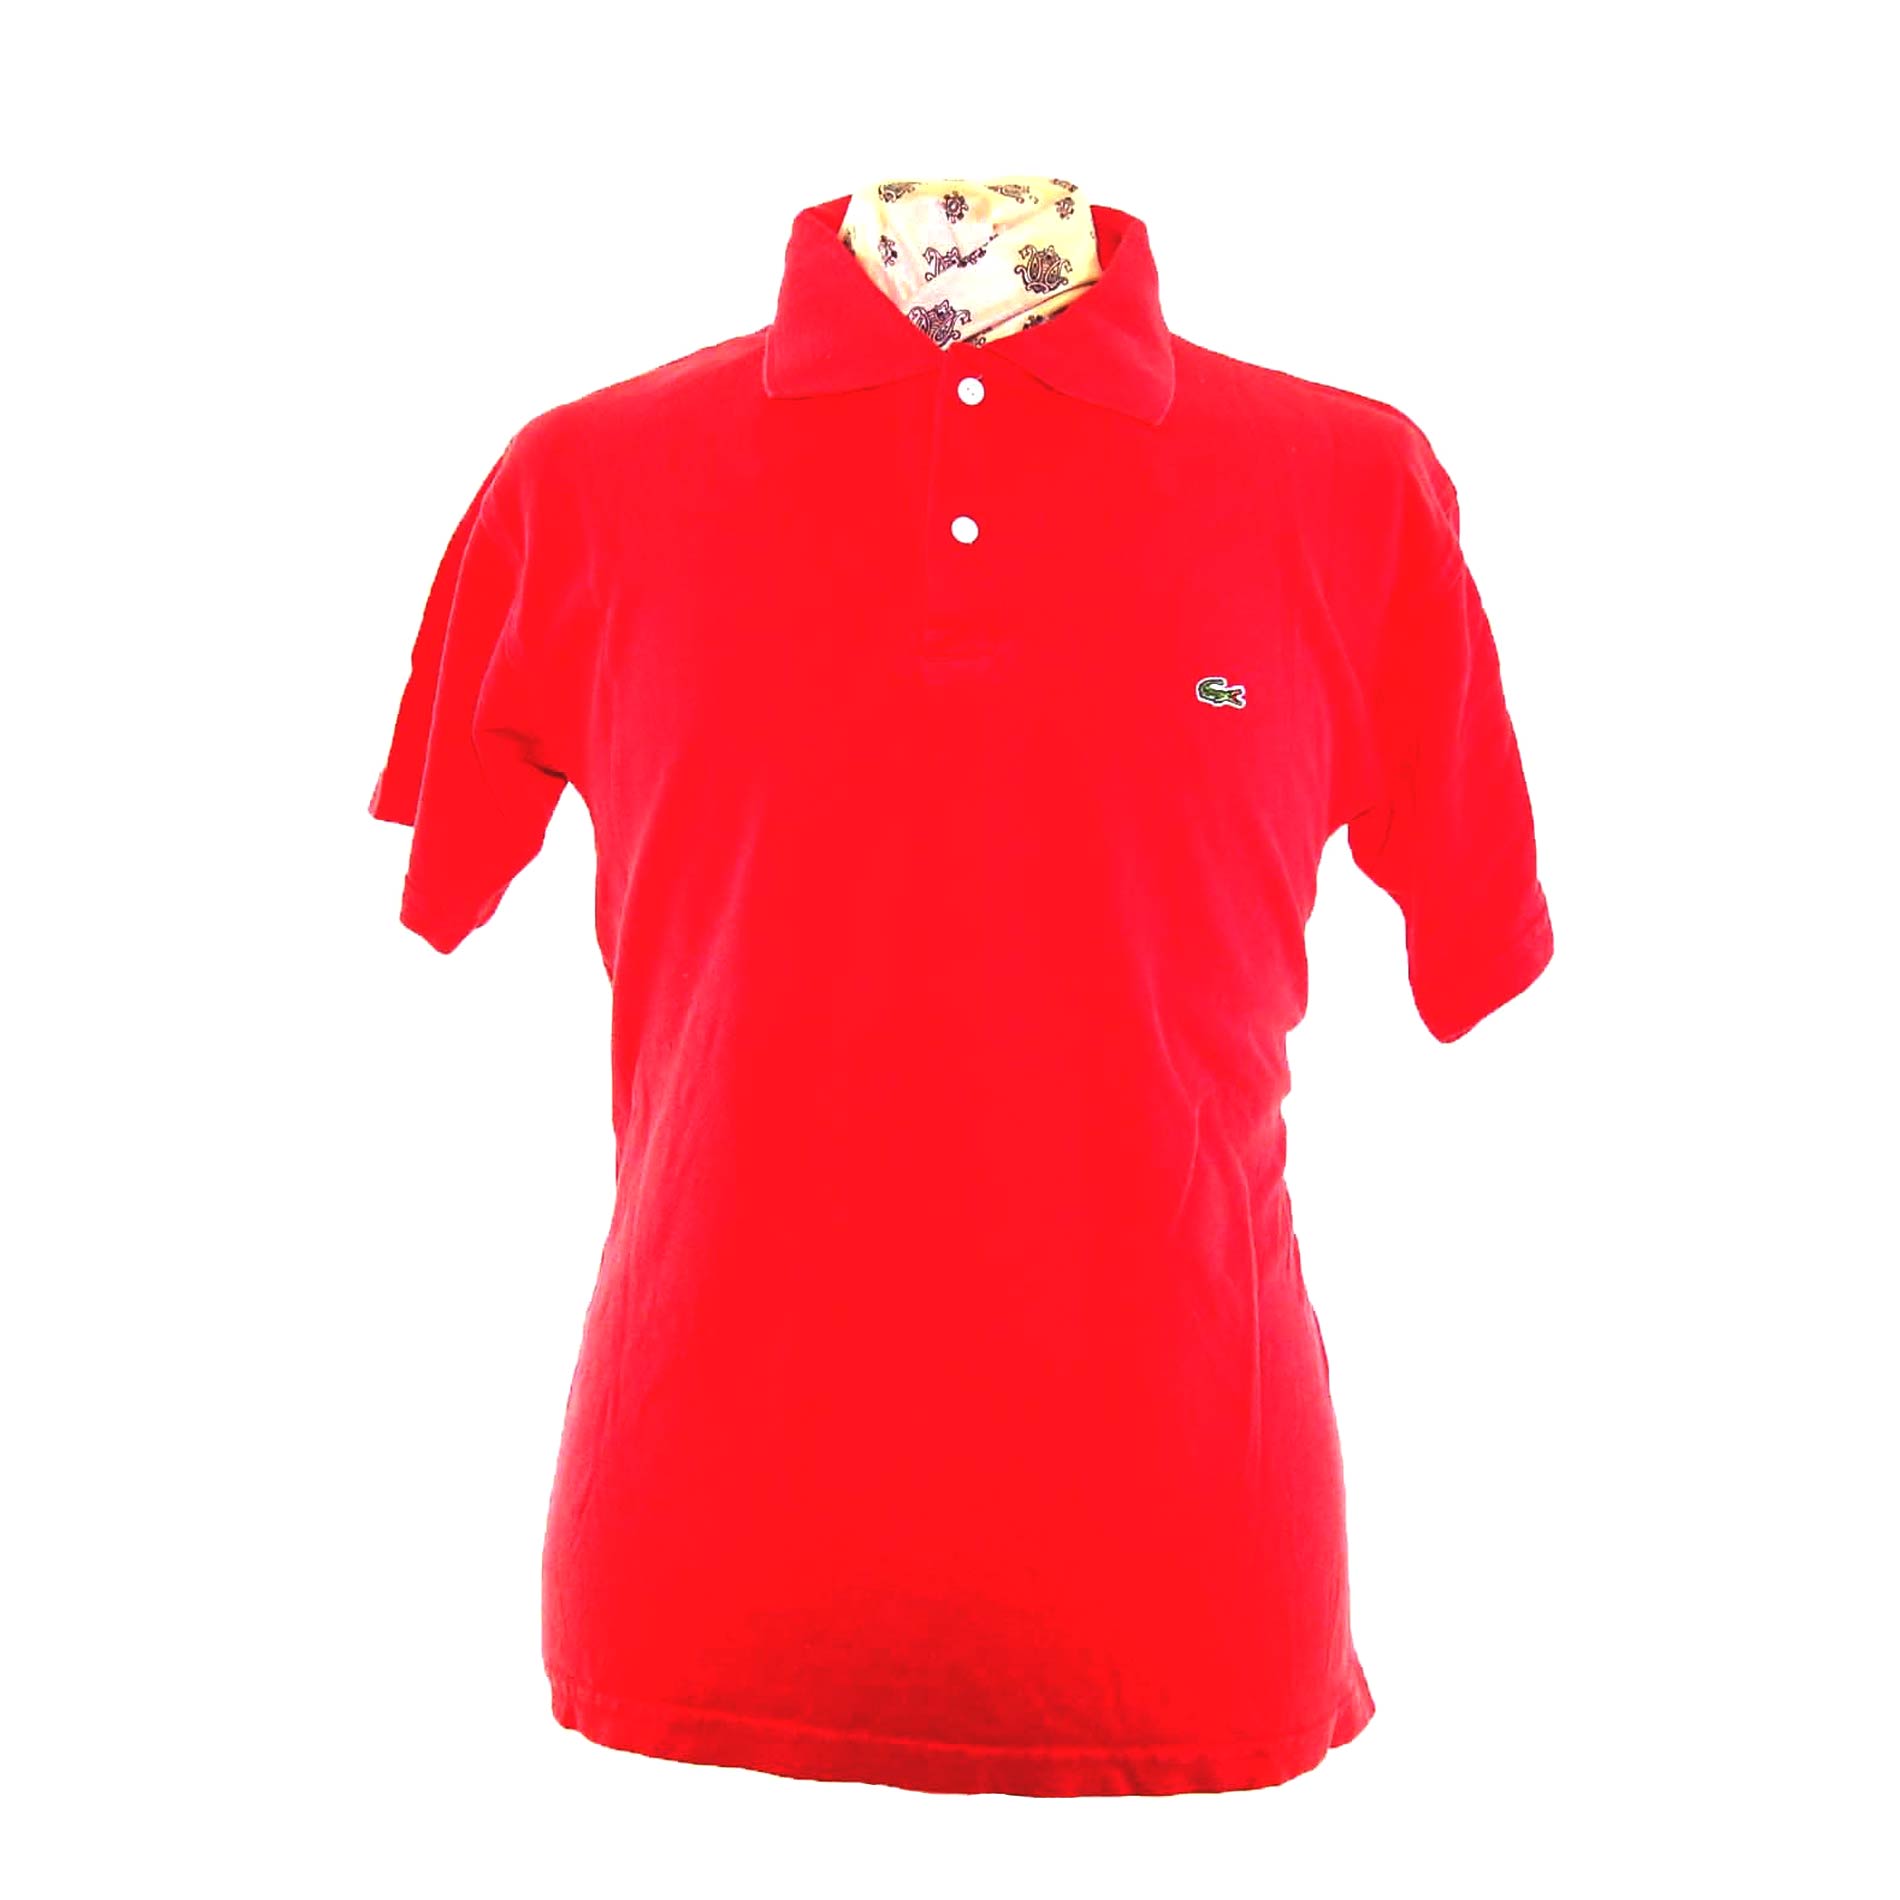 Lacoste Primary Red Polo Shirt - Blue 17 Vintage Clothing